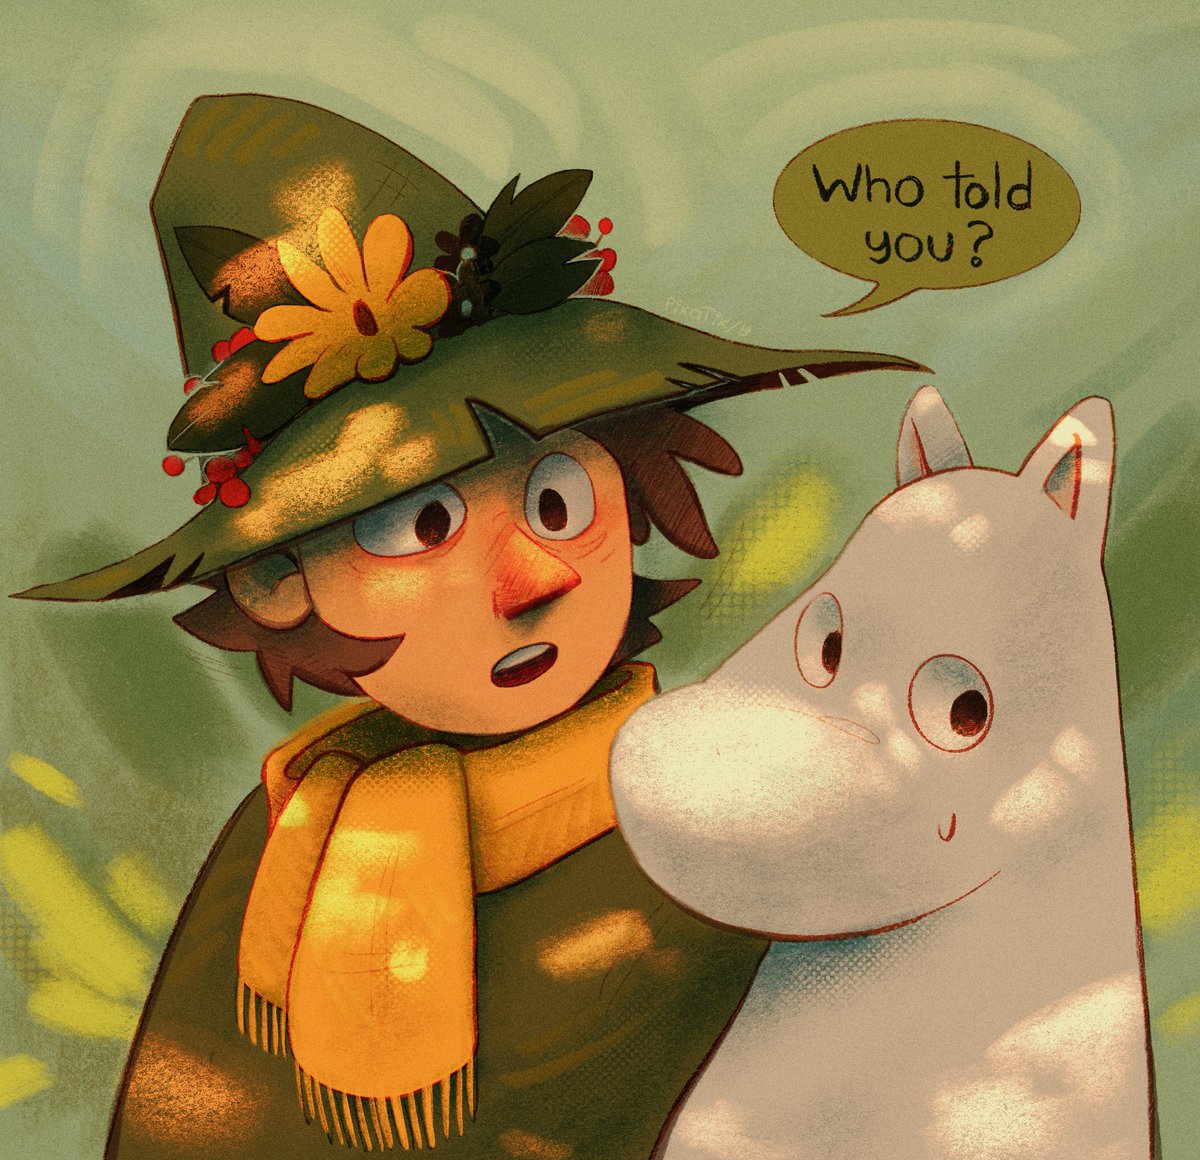 First proper Moomins drawing, and it's a joke from Discord with a friend 👍

(Also my birthday is very soon, yipeeee :D)

---
#Moomins #moominvalley #SnufkinFanArt #Snufkin #MoominFanArt #Moomintroll #LittleMy